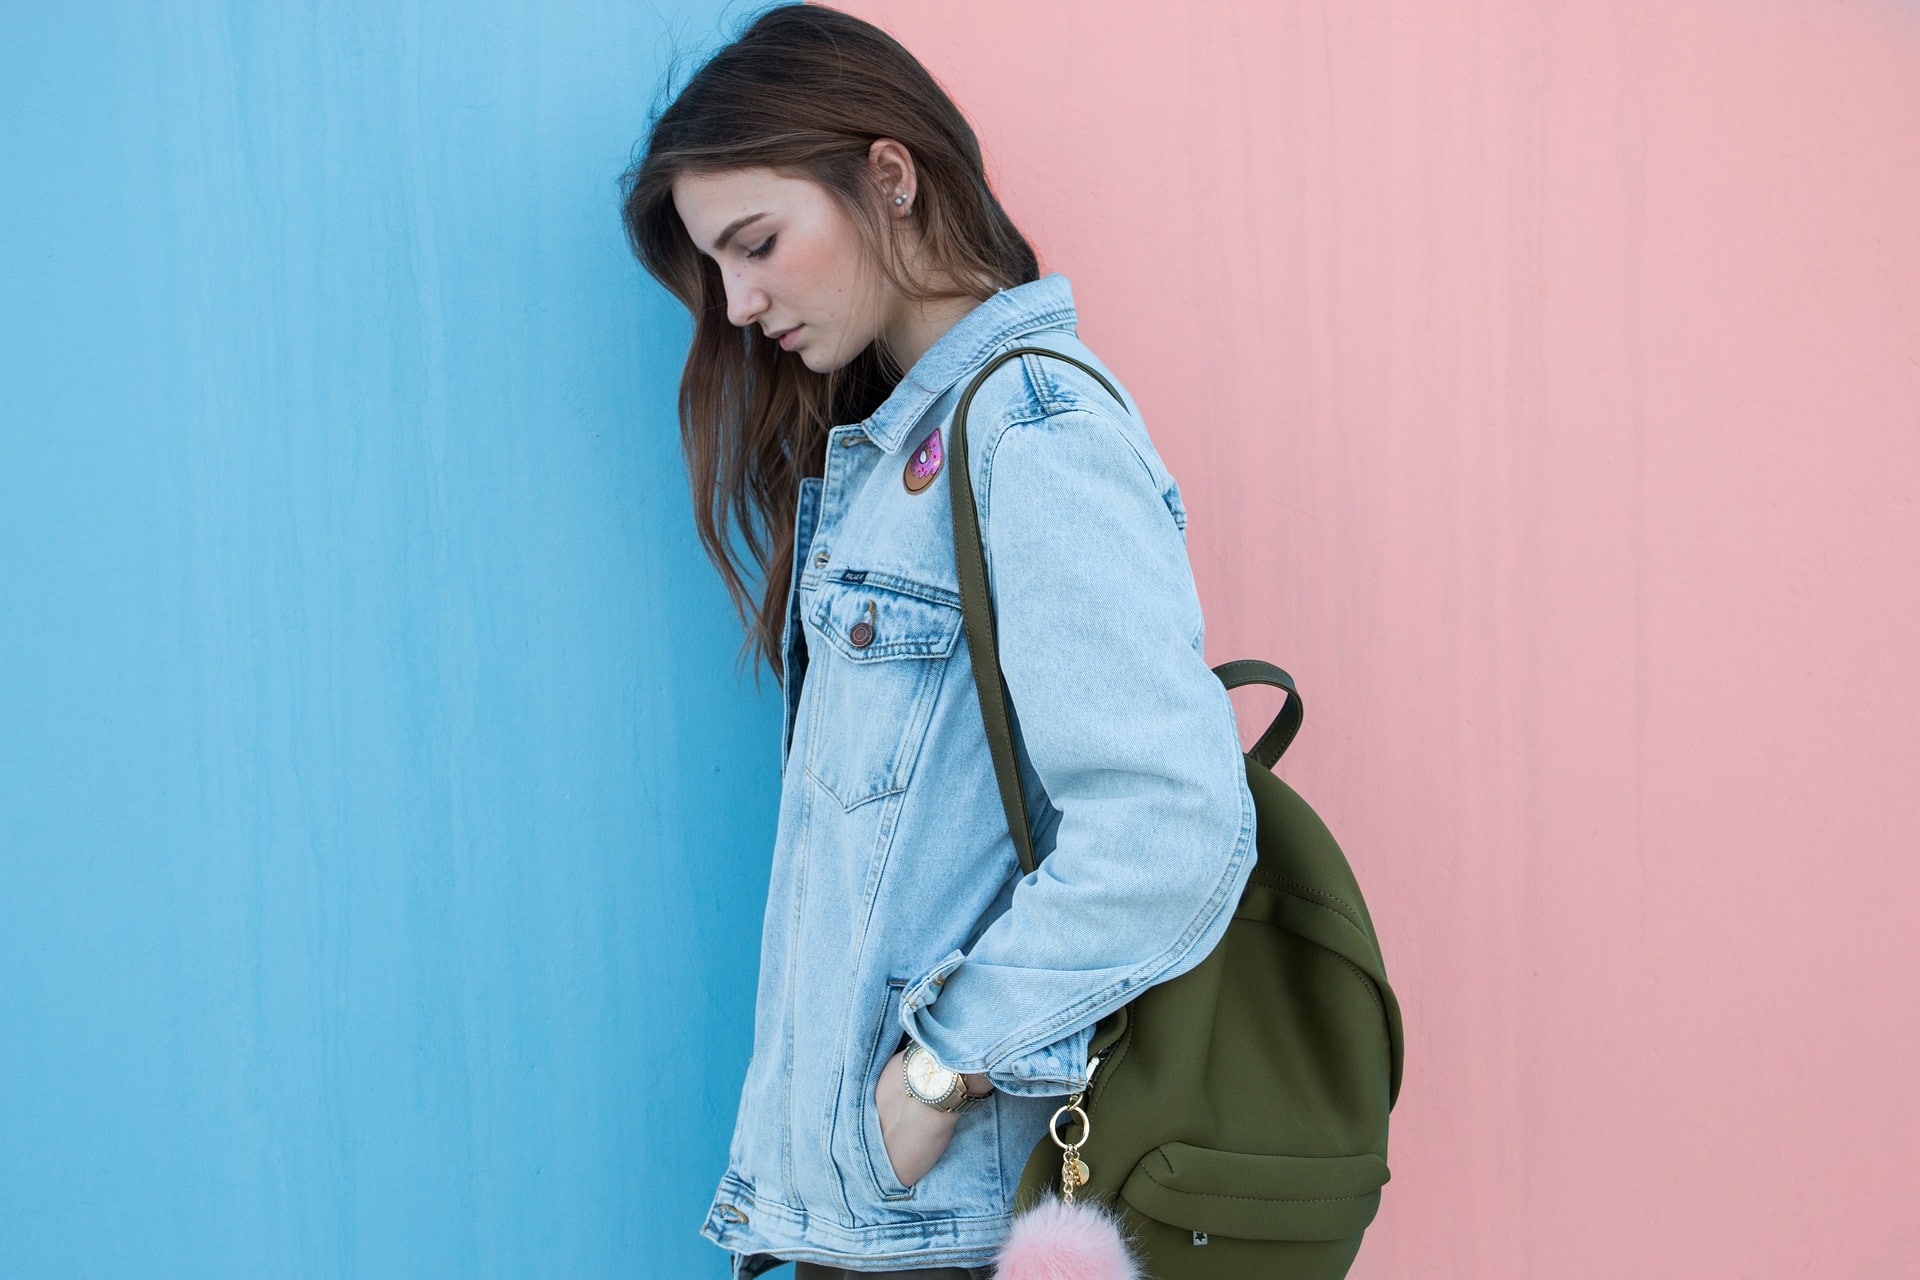 College girl standing in front of a blue and pink wall